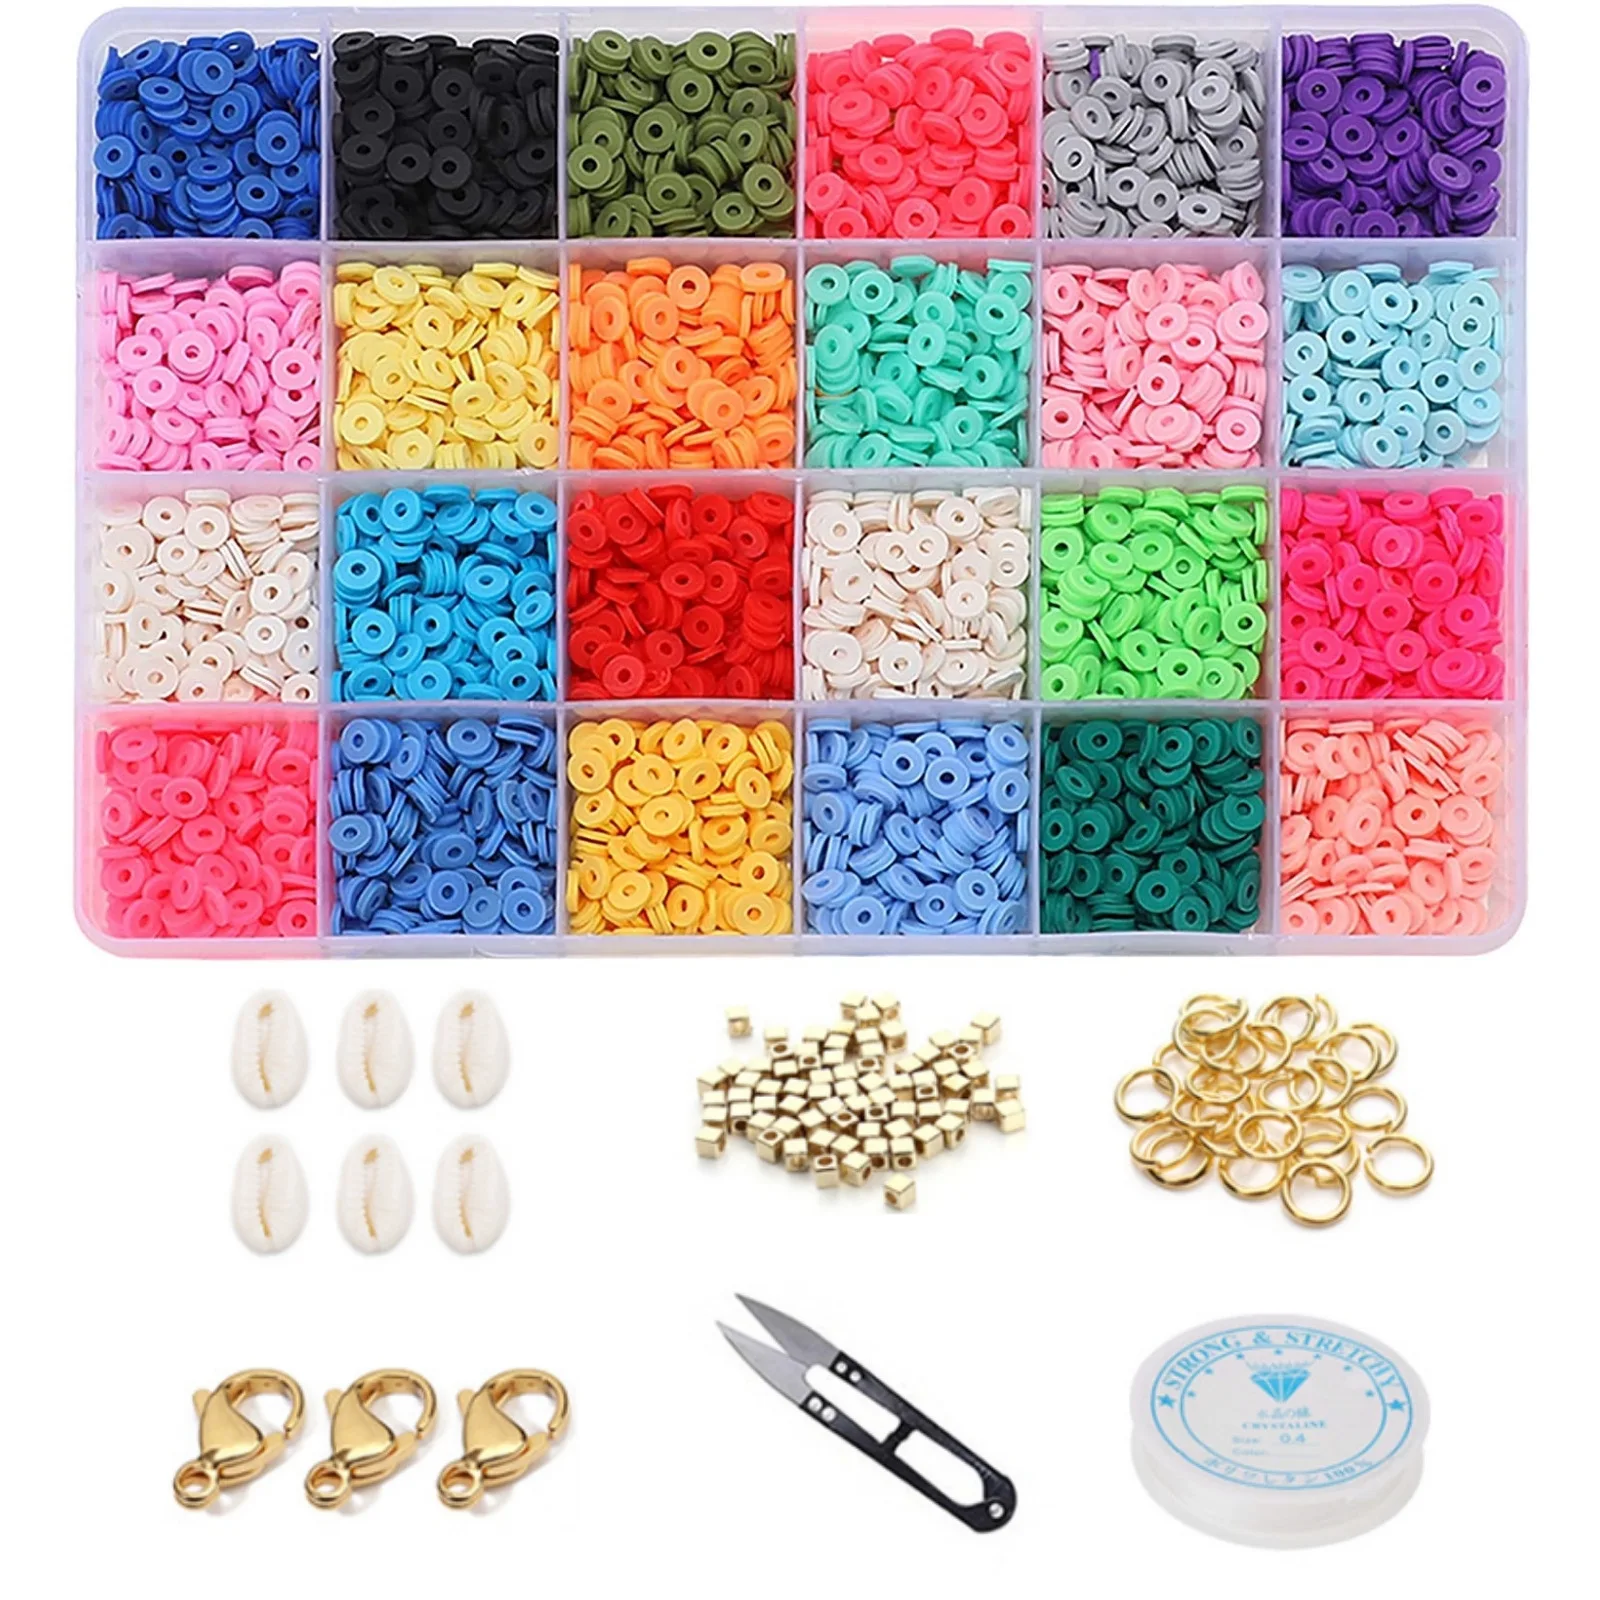 

6mm polymer clay beads flakes boxed color discs bohemian jewelry accessories set box shells